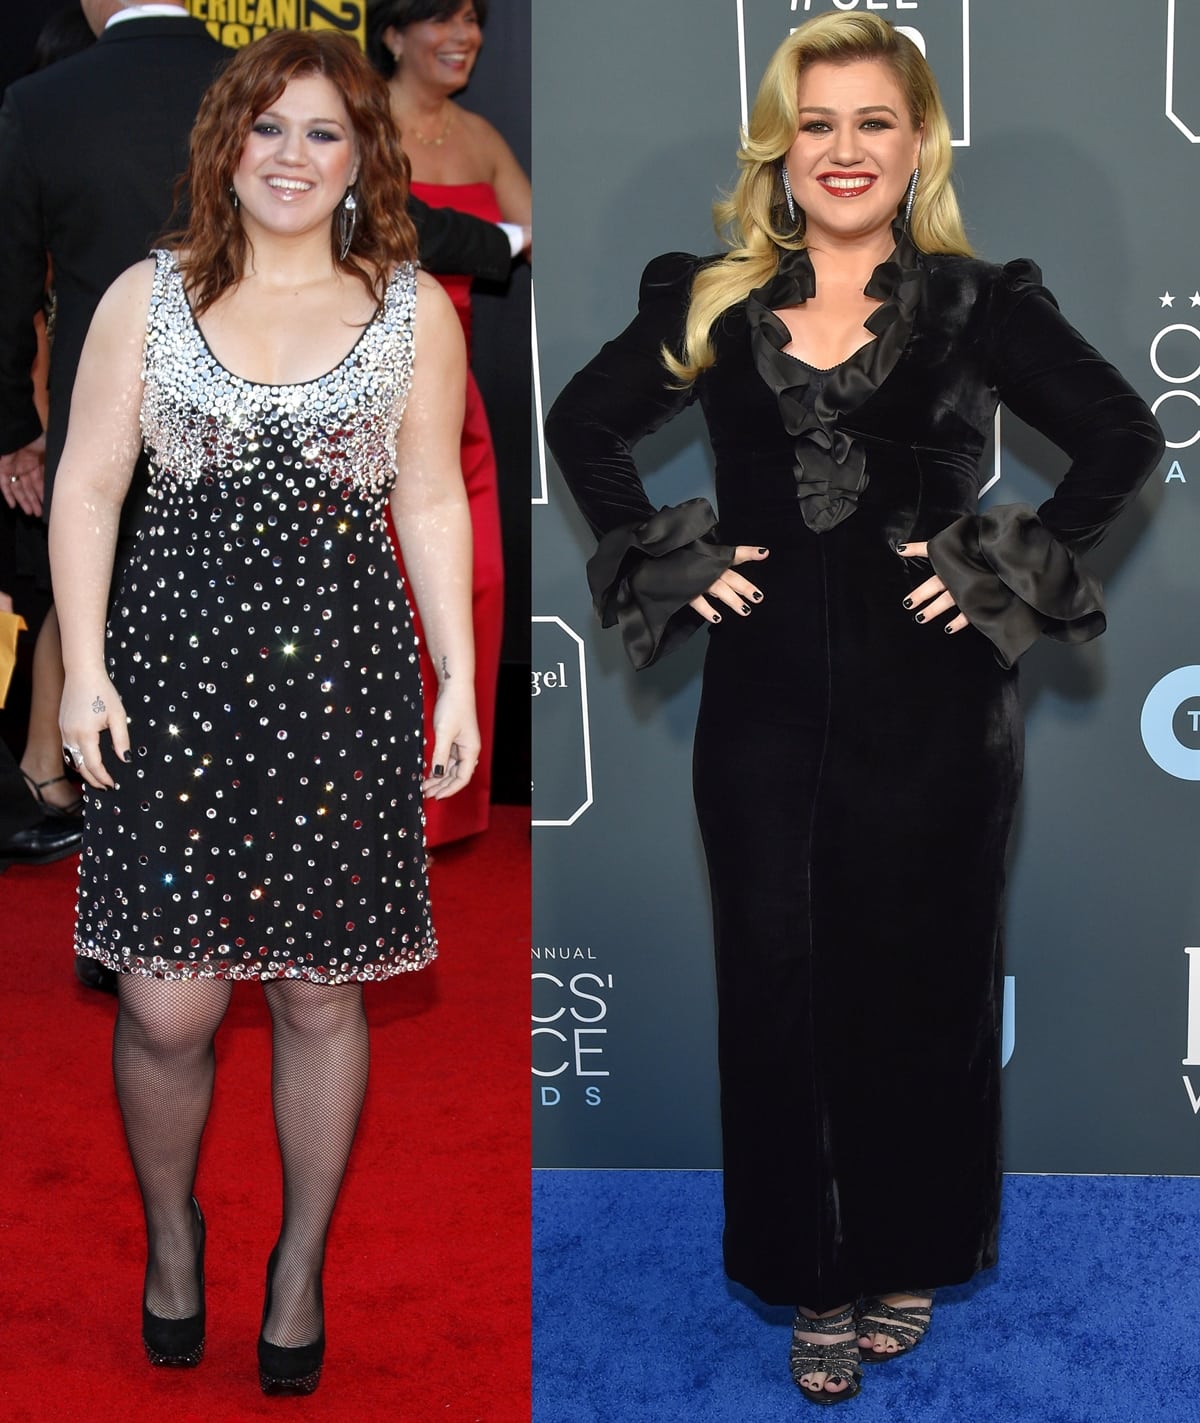 Before and After Weight Loss: Kelly Clarkson at the 2009 American Music Awards (L) and the 2020 Critics' Choice Awards